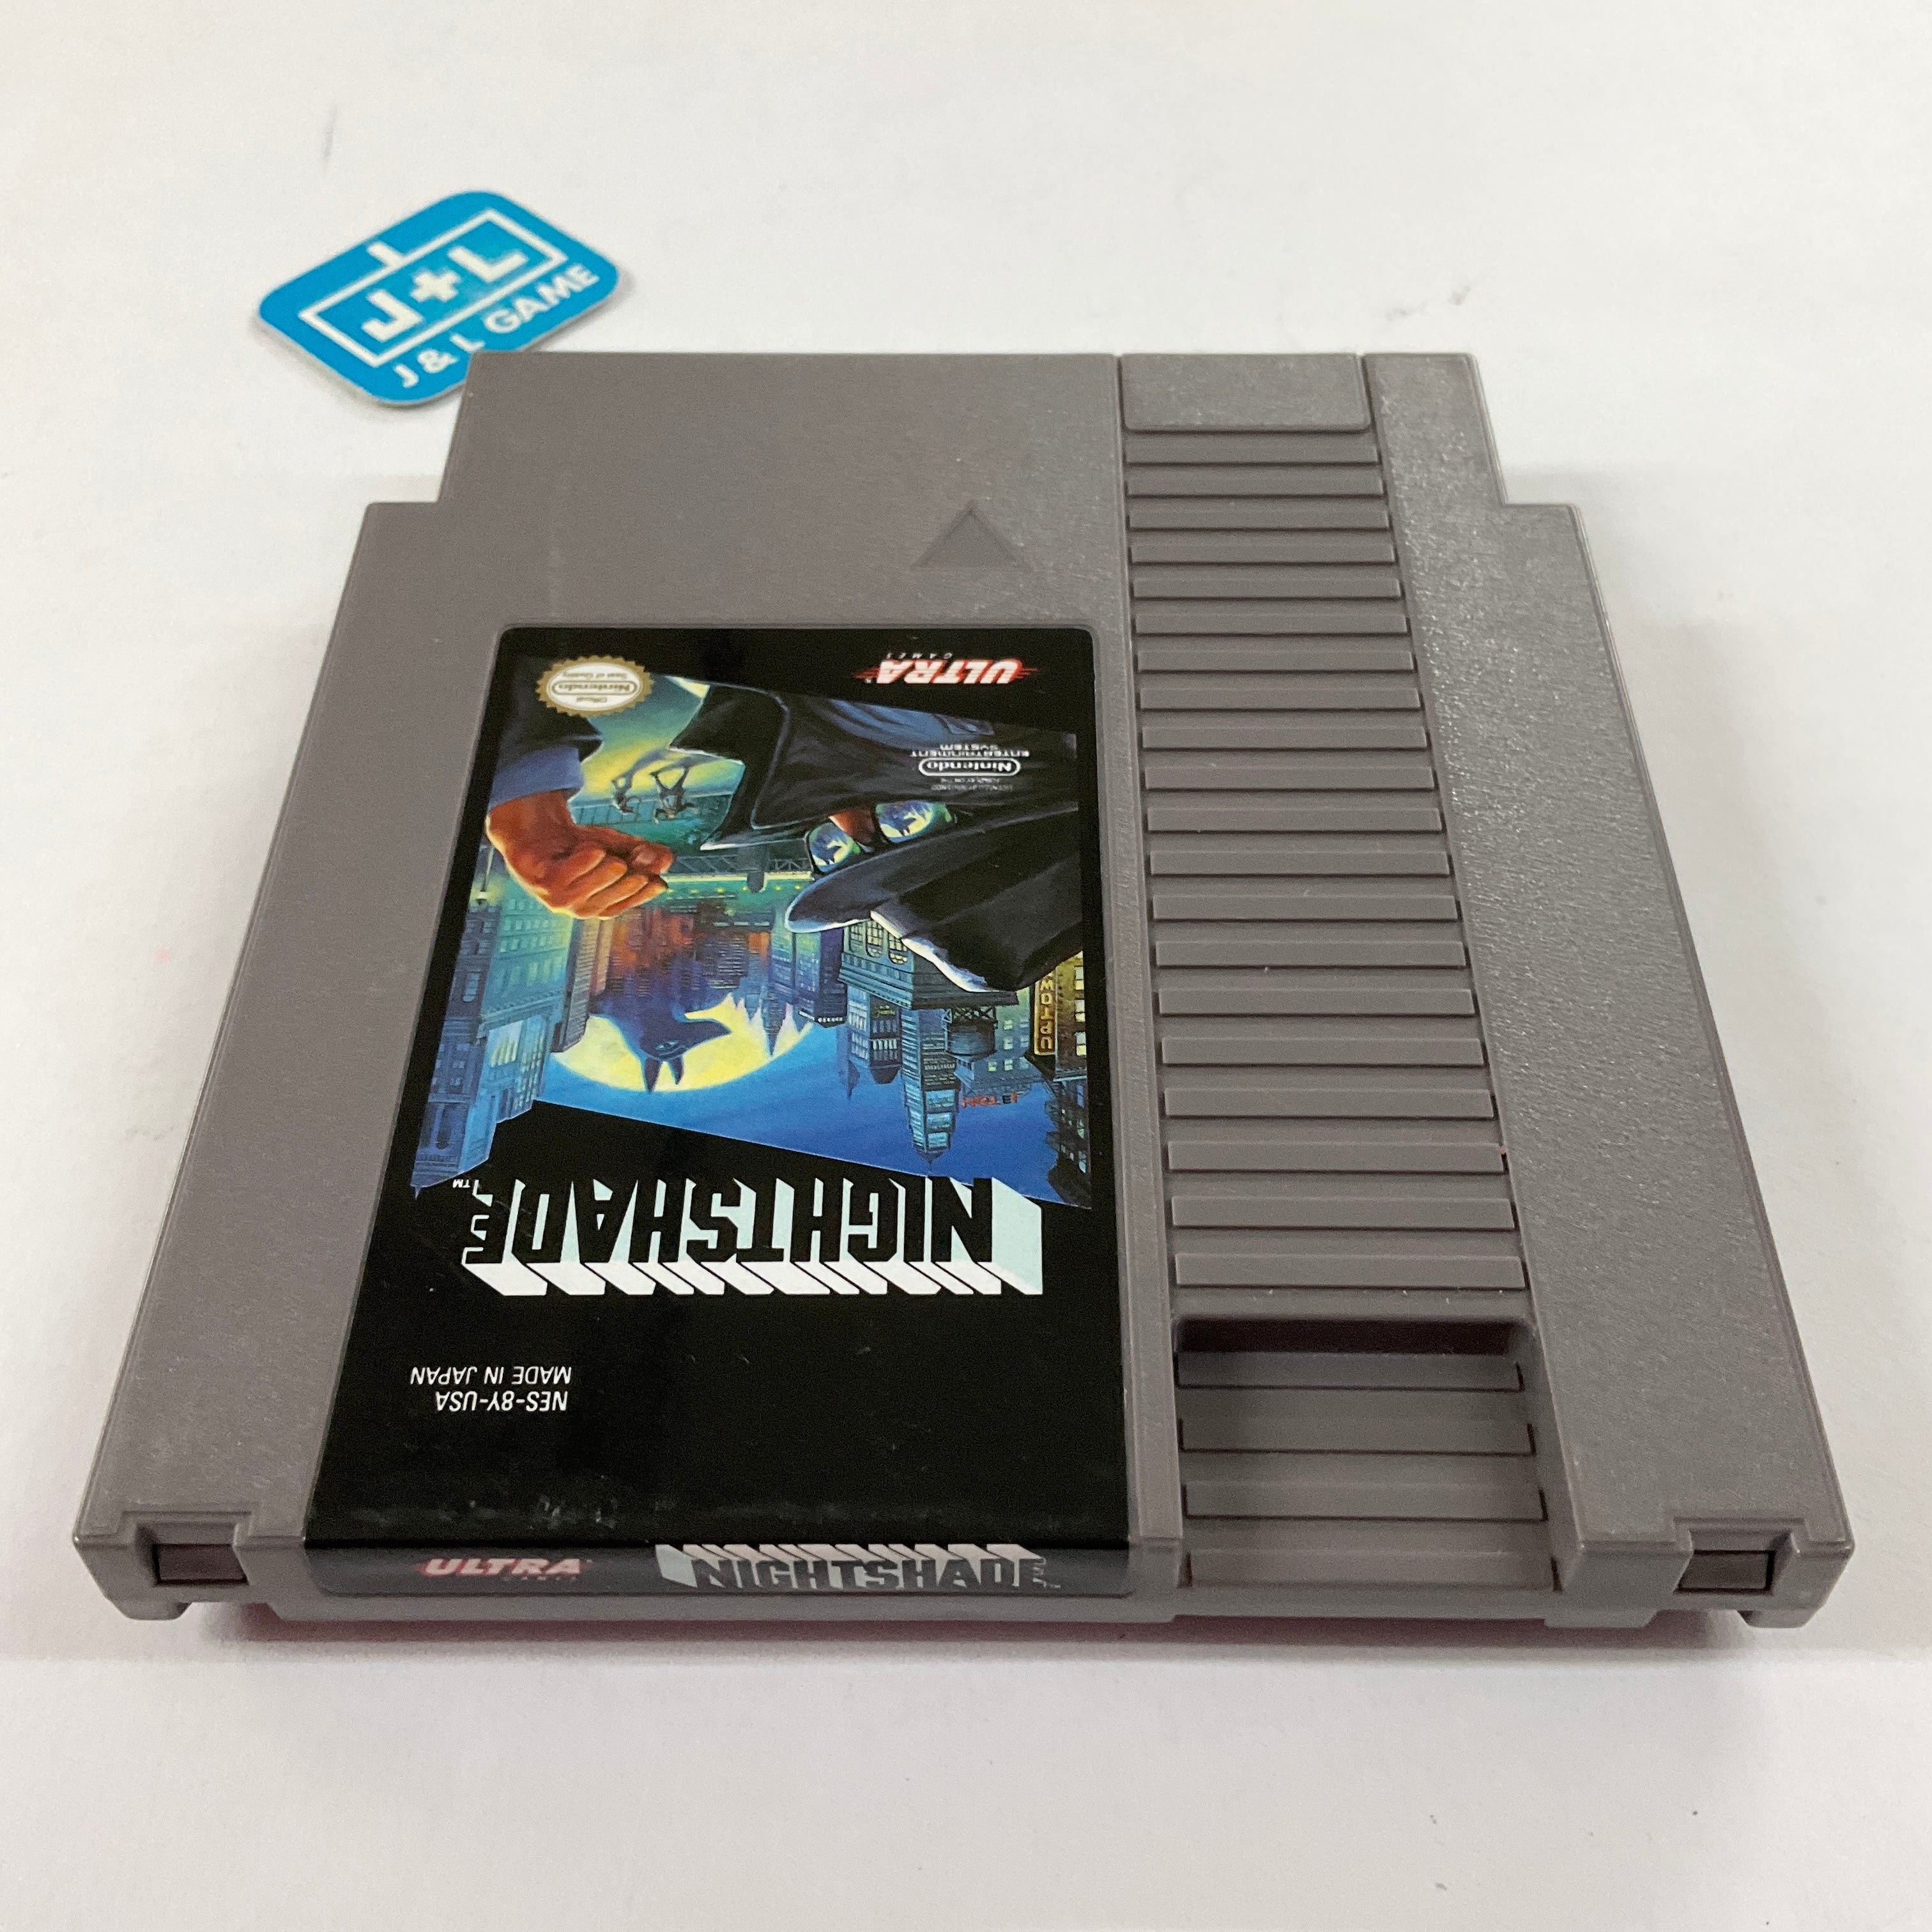 Nightshade - (NES) Nintendo Entertainment System [Pre-Owned] Video Games Ultra   